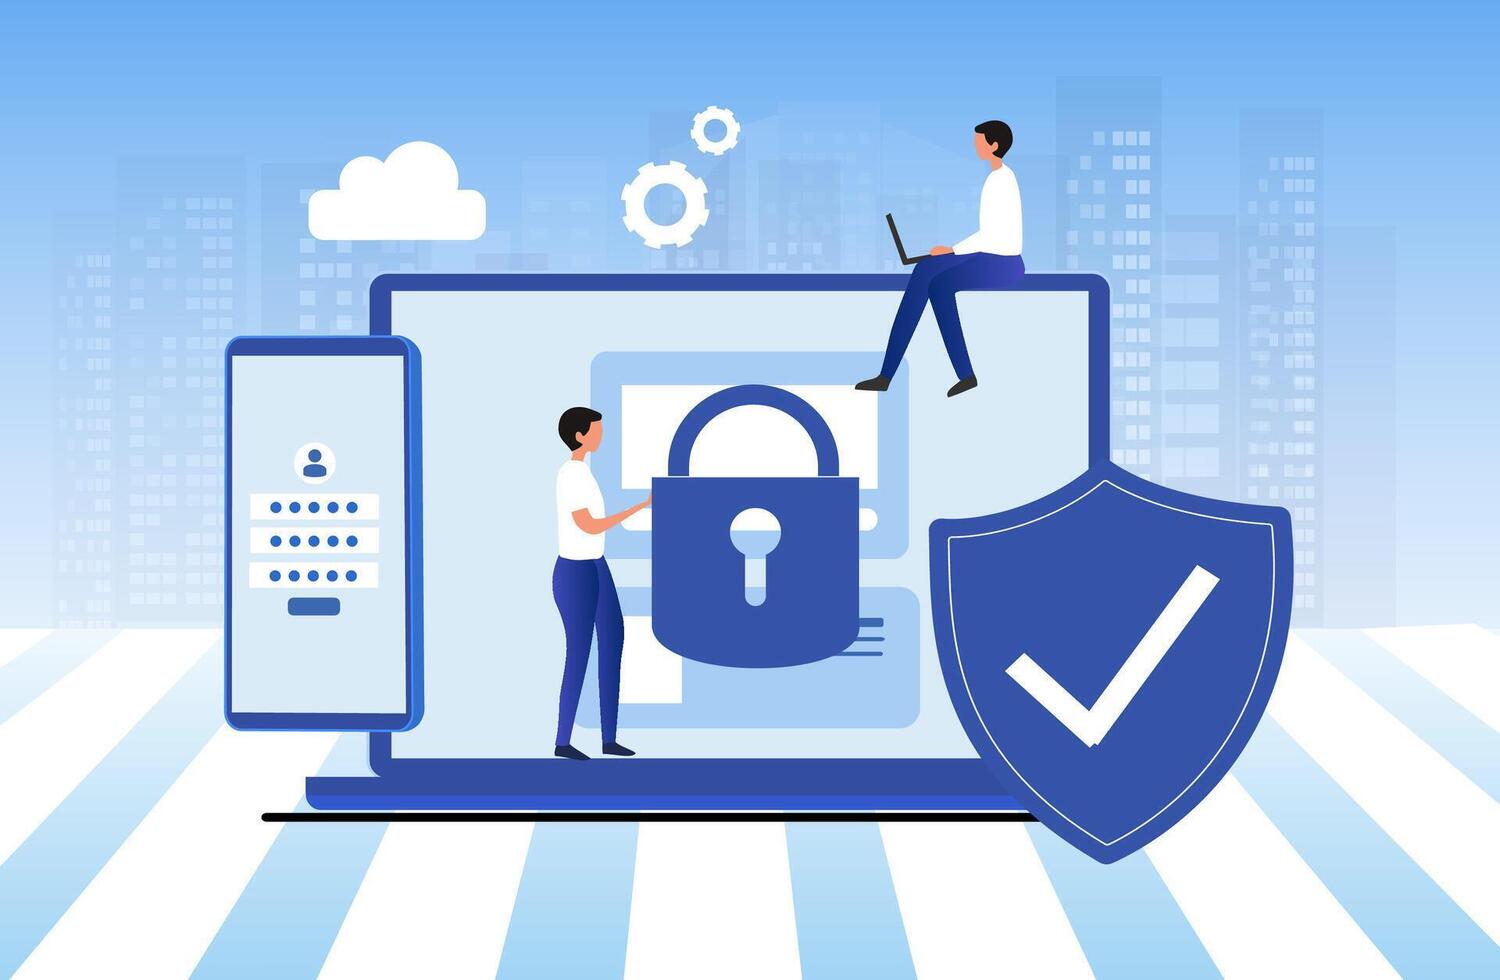 Cyber security and data protection privacy, PDPA concept. Businessman secure data management and protect data from hacker attacks and padlock icon to internet technology networking vector